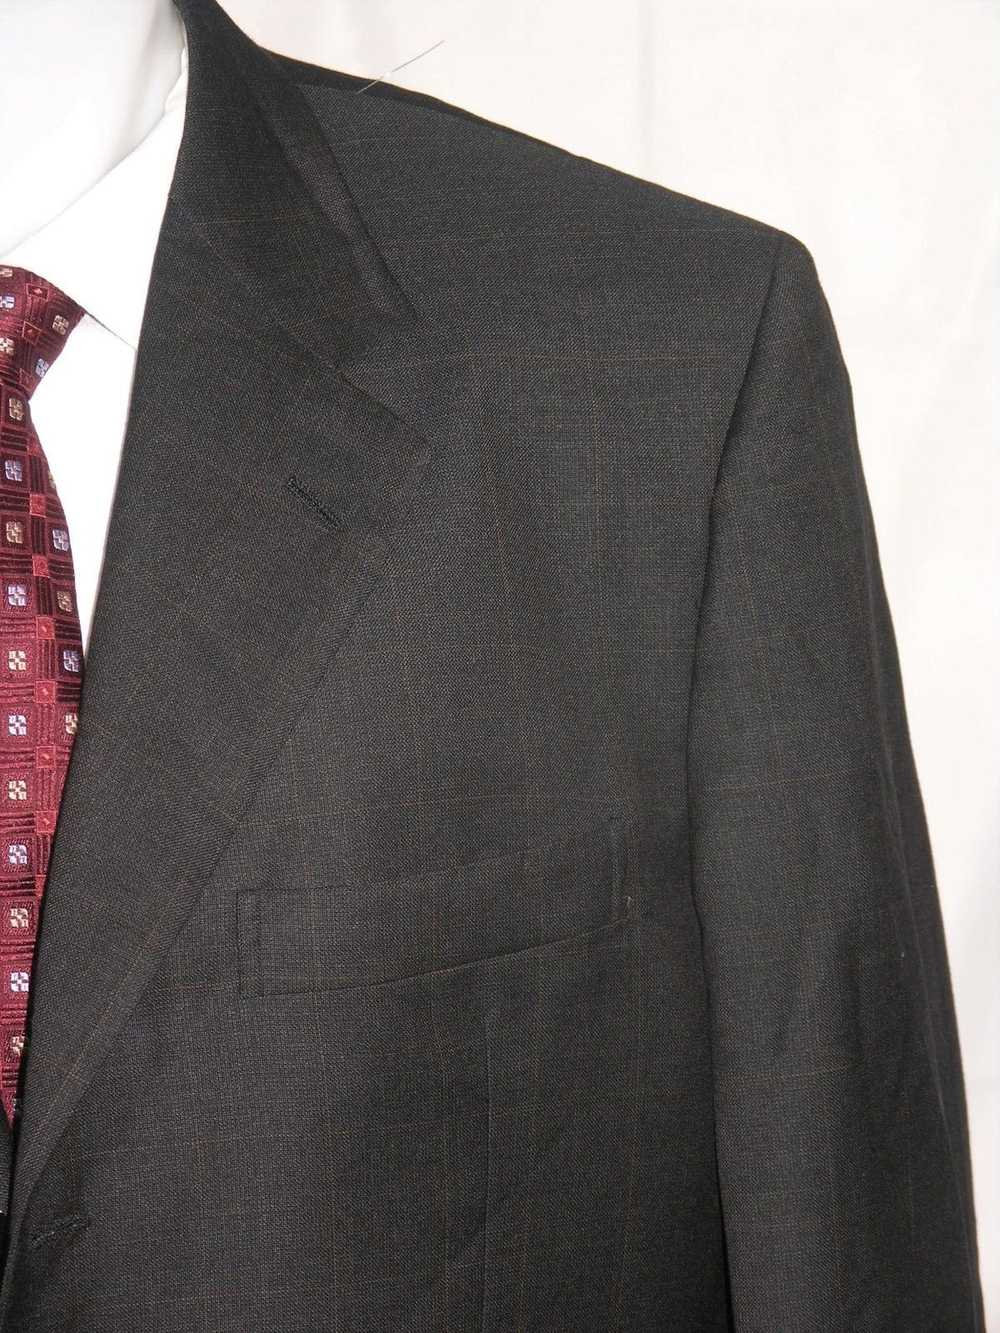 Davenza Roma Hand Tailored Three Button Suit 46L - image 5